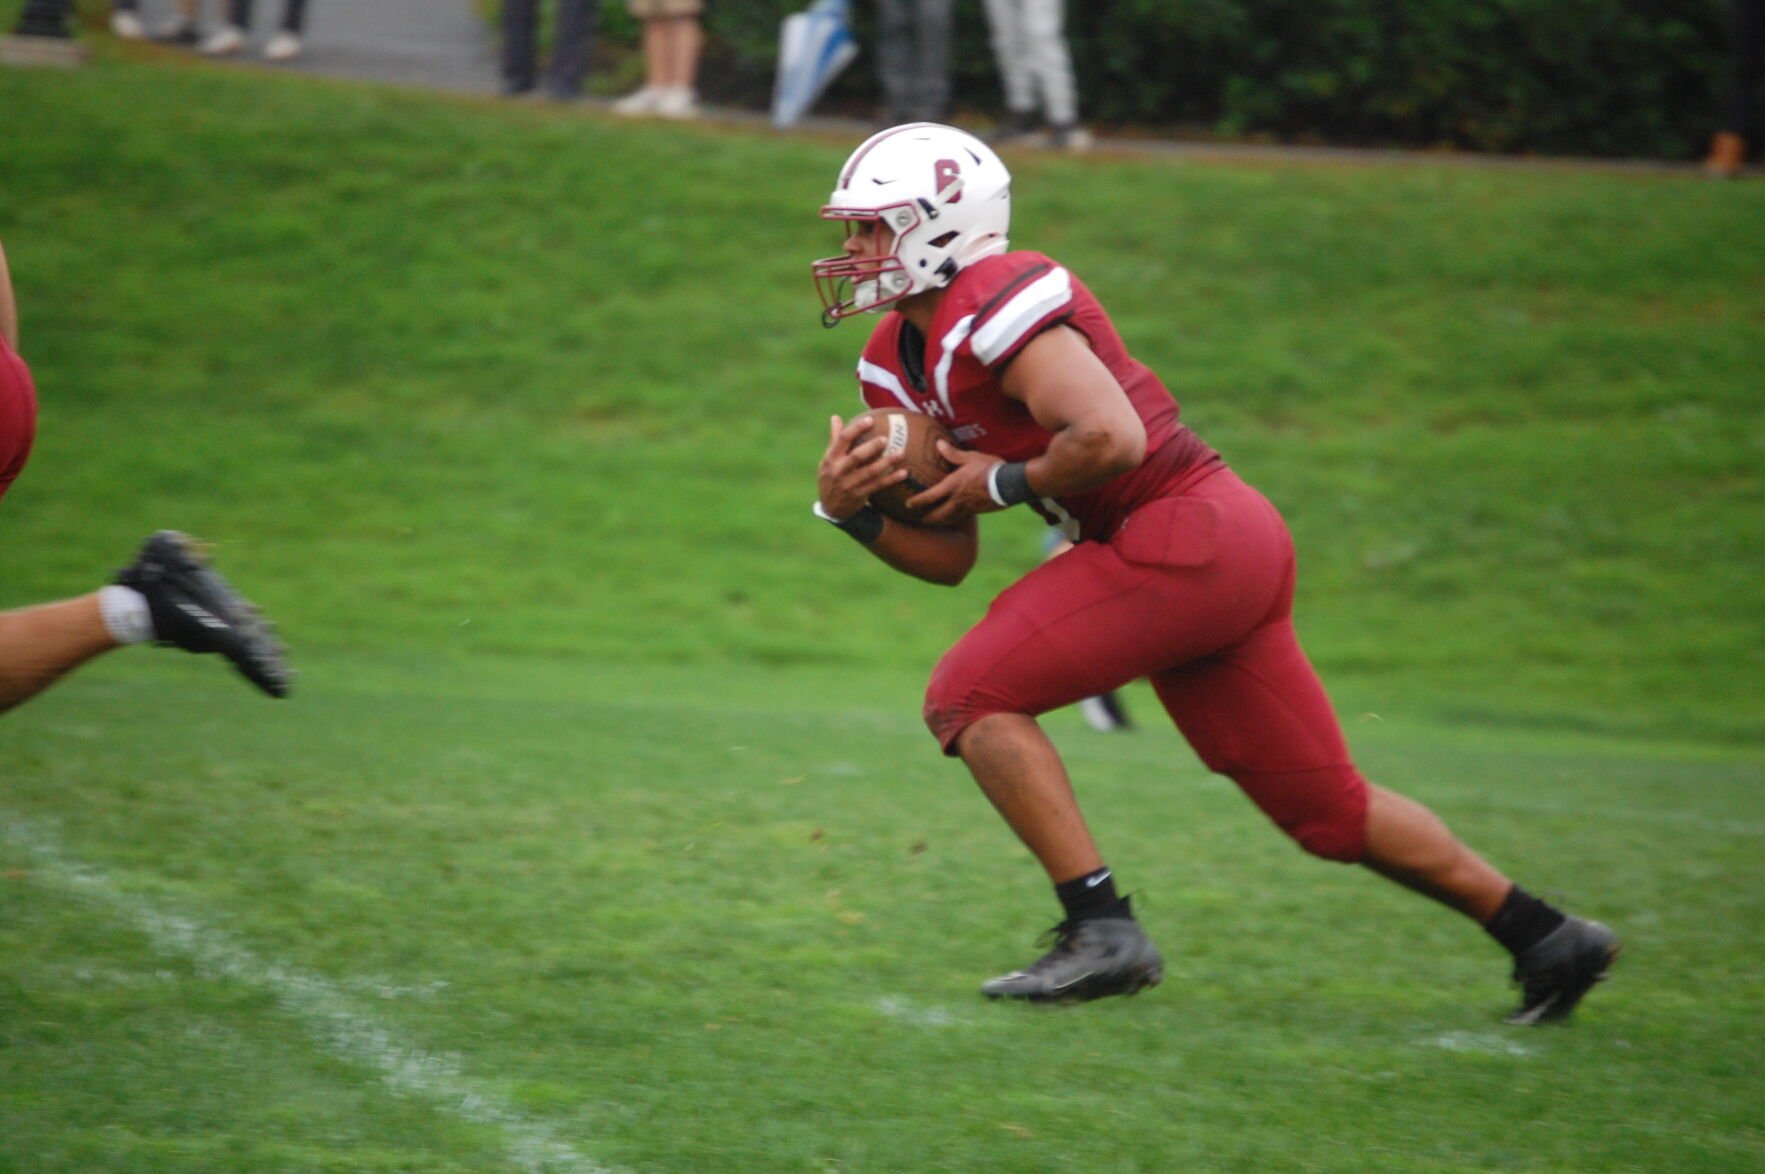 DuBose runs in three TDs, Governor’s rolls over Middlesex School in shutout